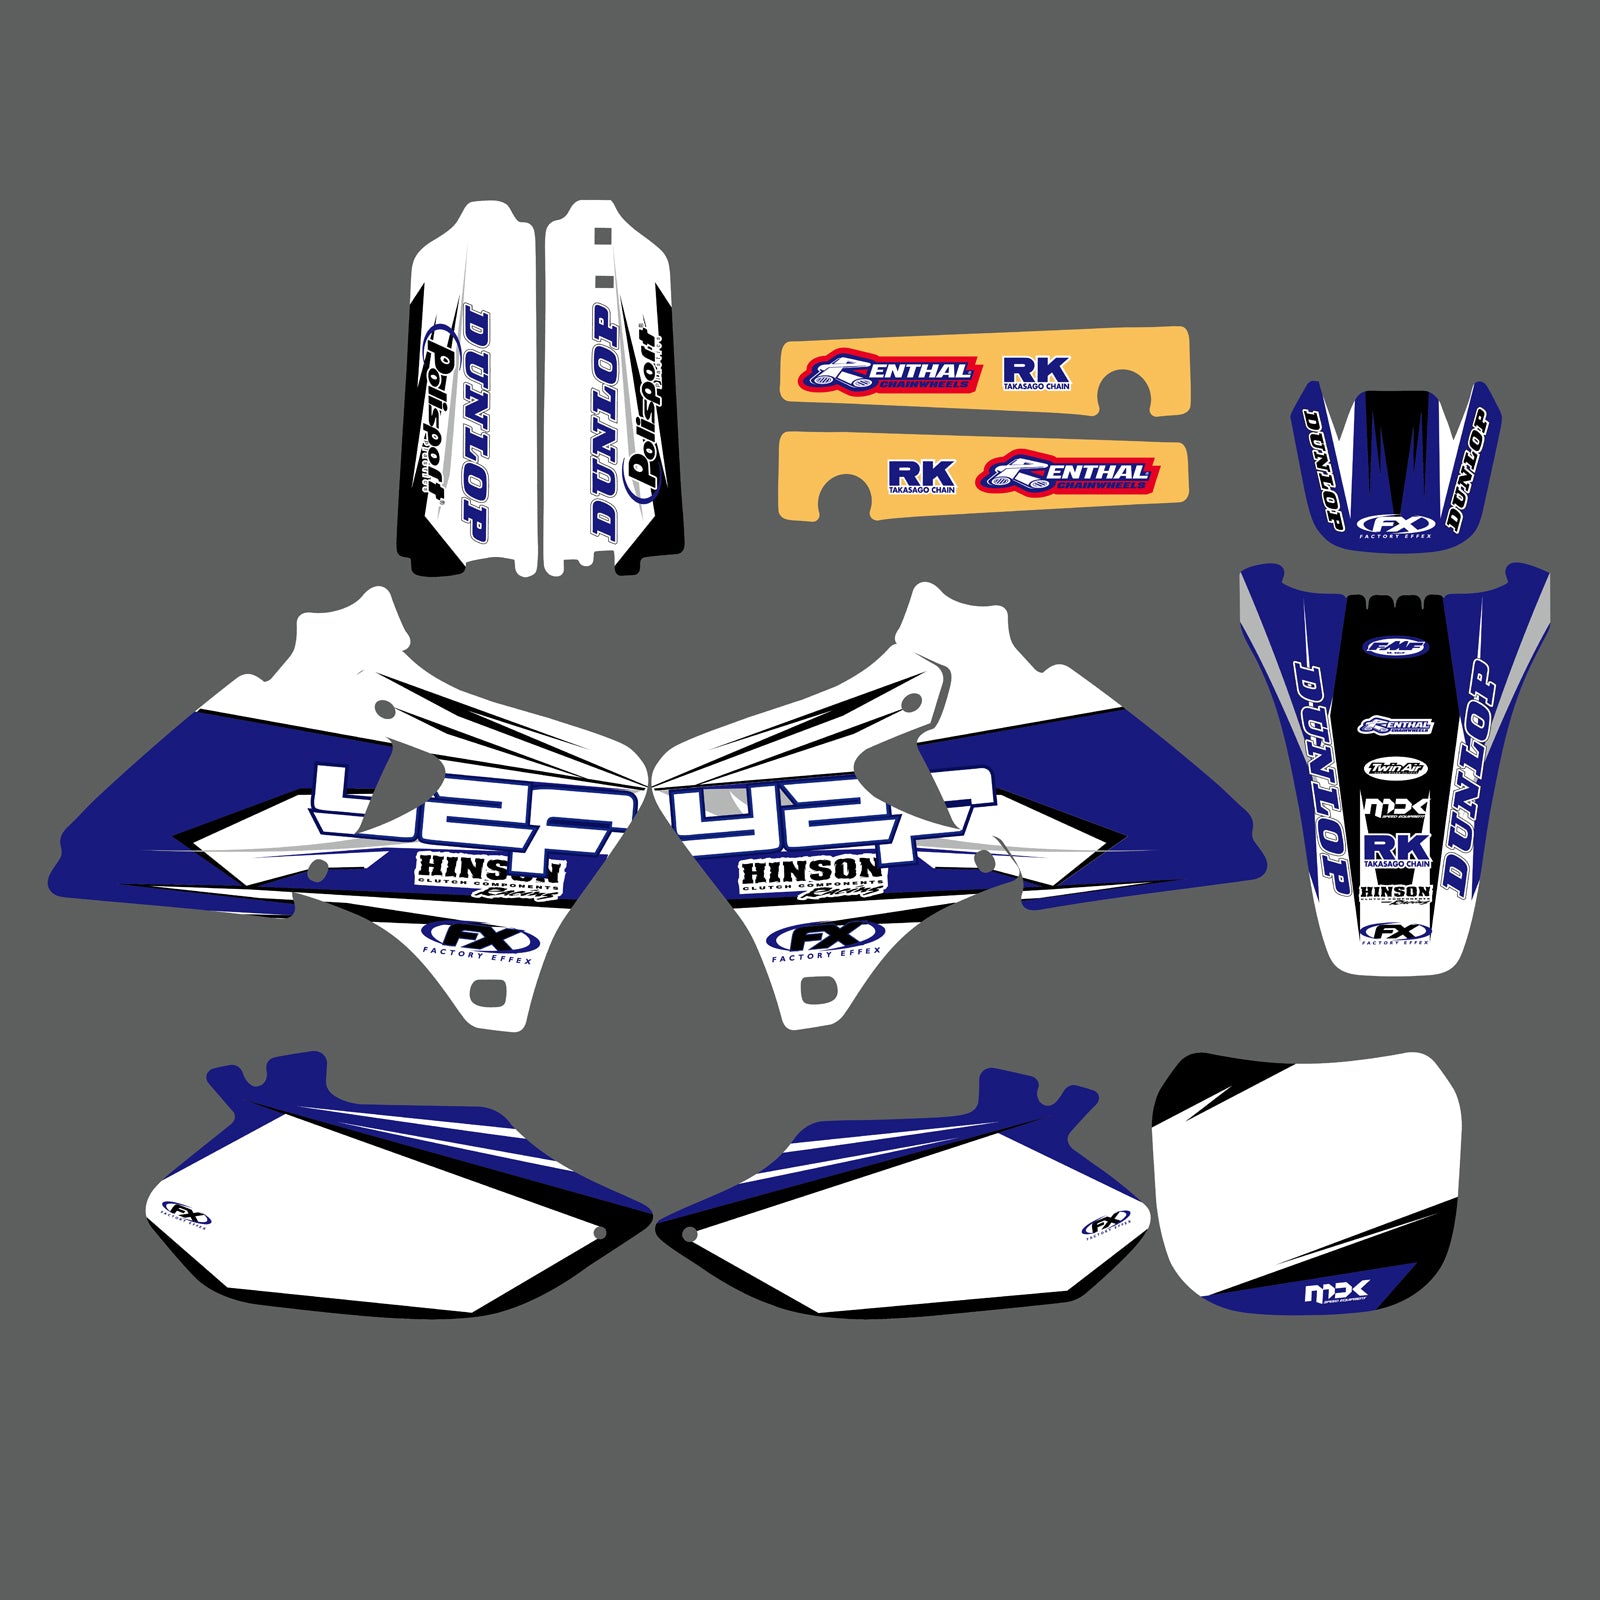 Team Graphics Backgrounds Decals Kit For Yamaha YZ250F YZ400F YZ426F 1998-2002